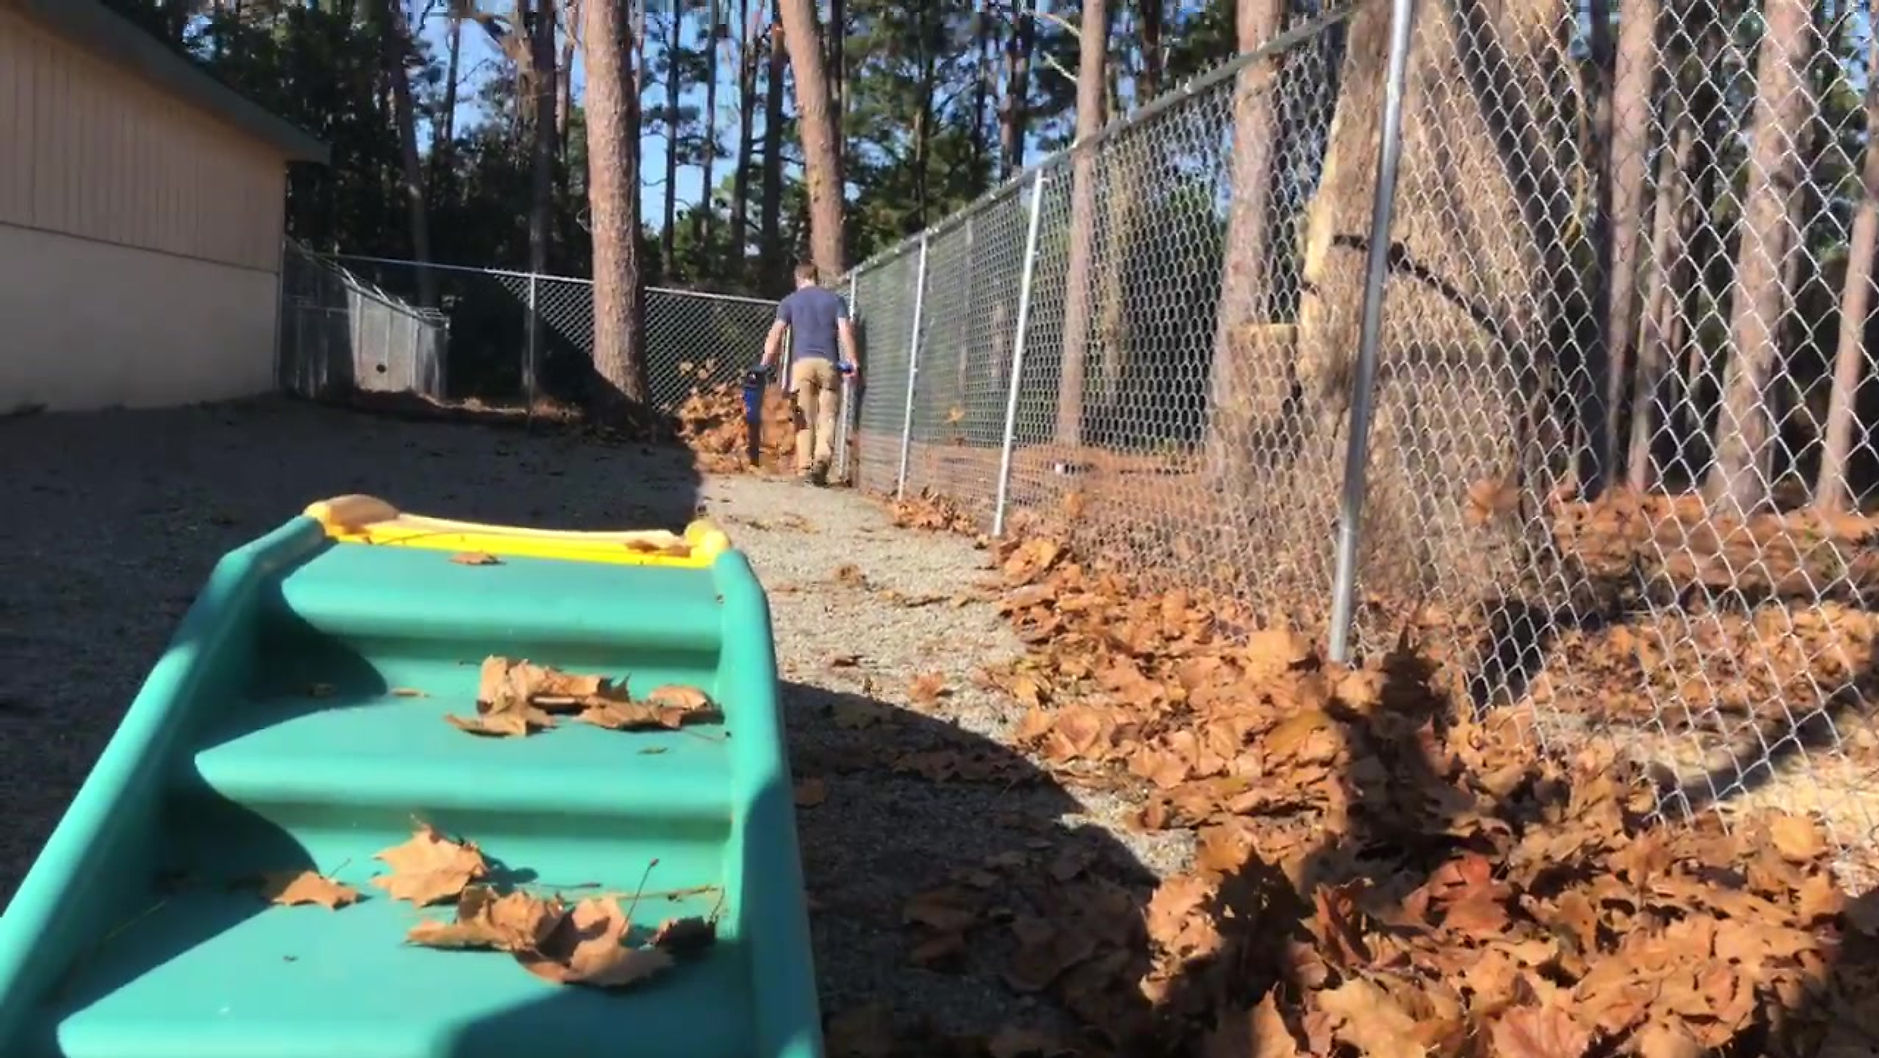 Doggie daycare at Pinehurst Animal Hospital in Southern Pines NC